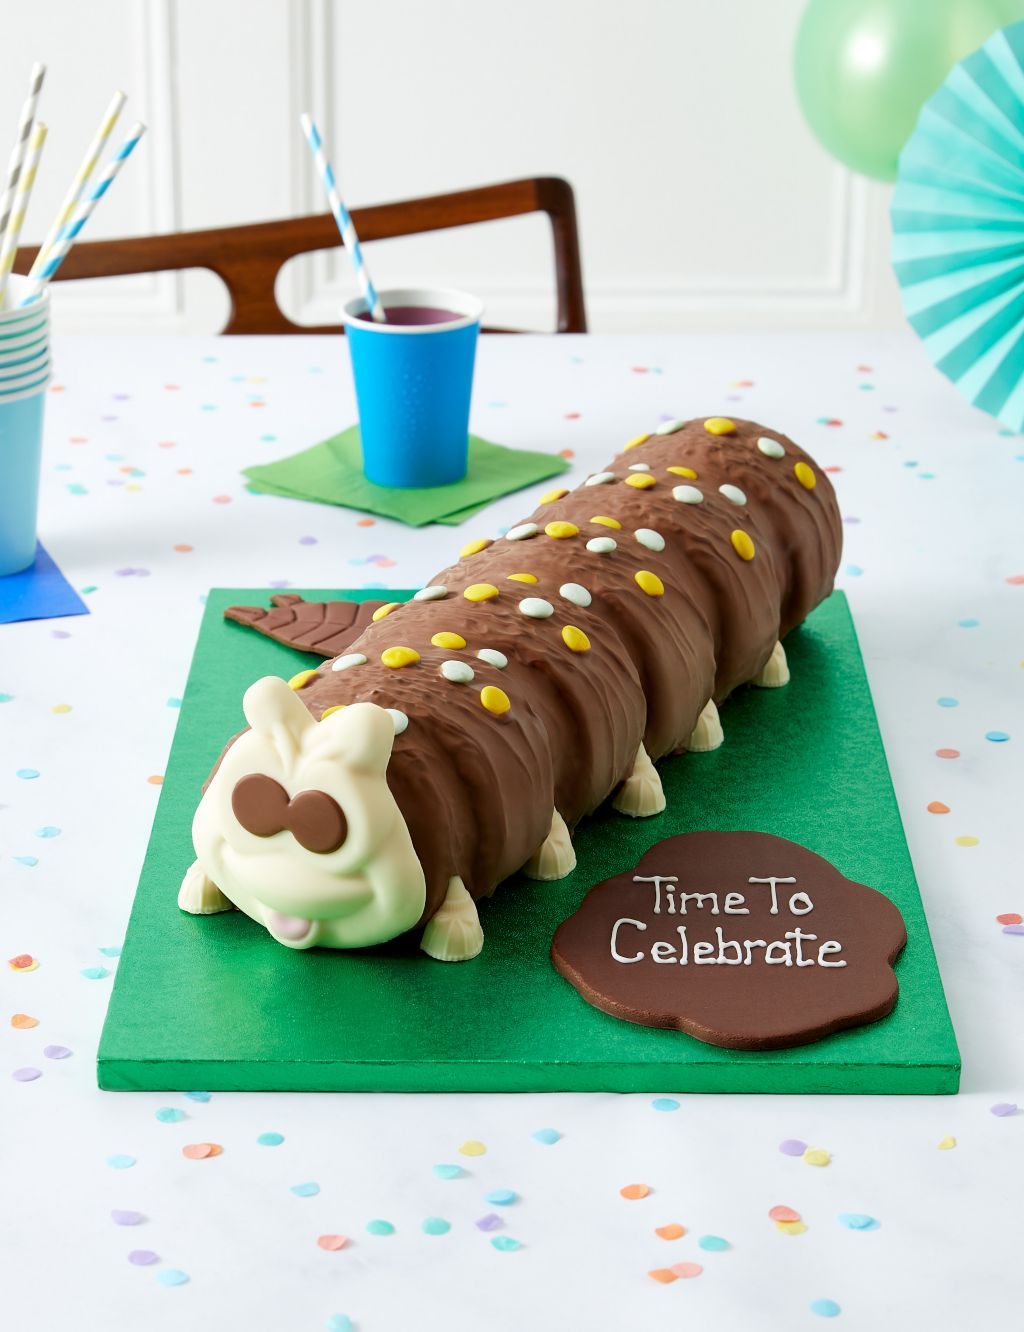 Personalised Giant Colin the Caterpillar™ Cake (Serves 40)